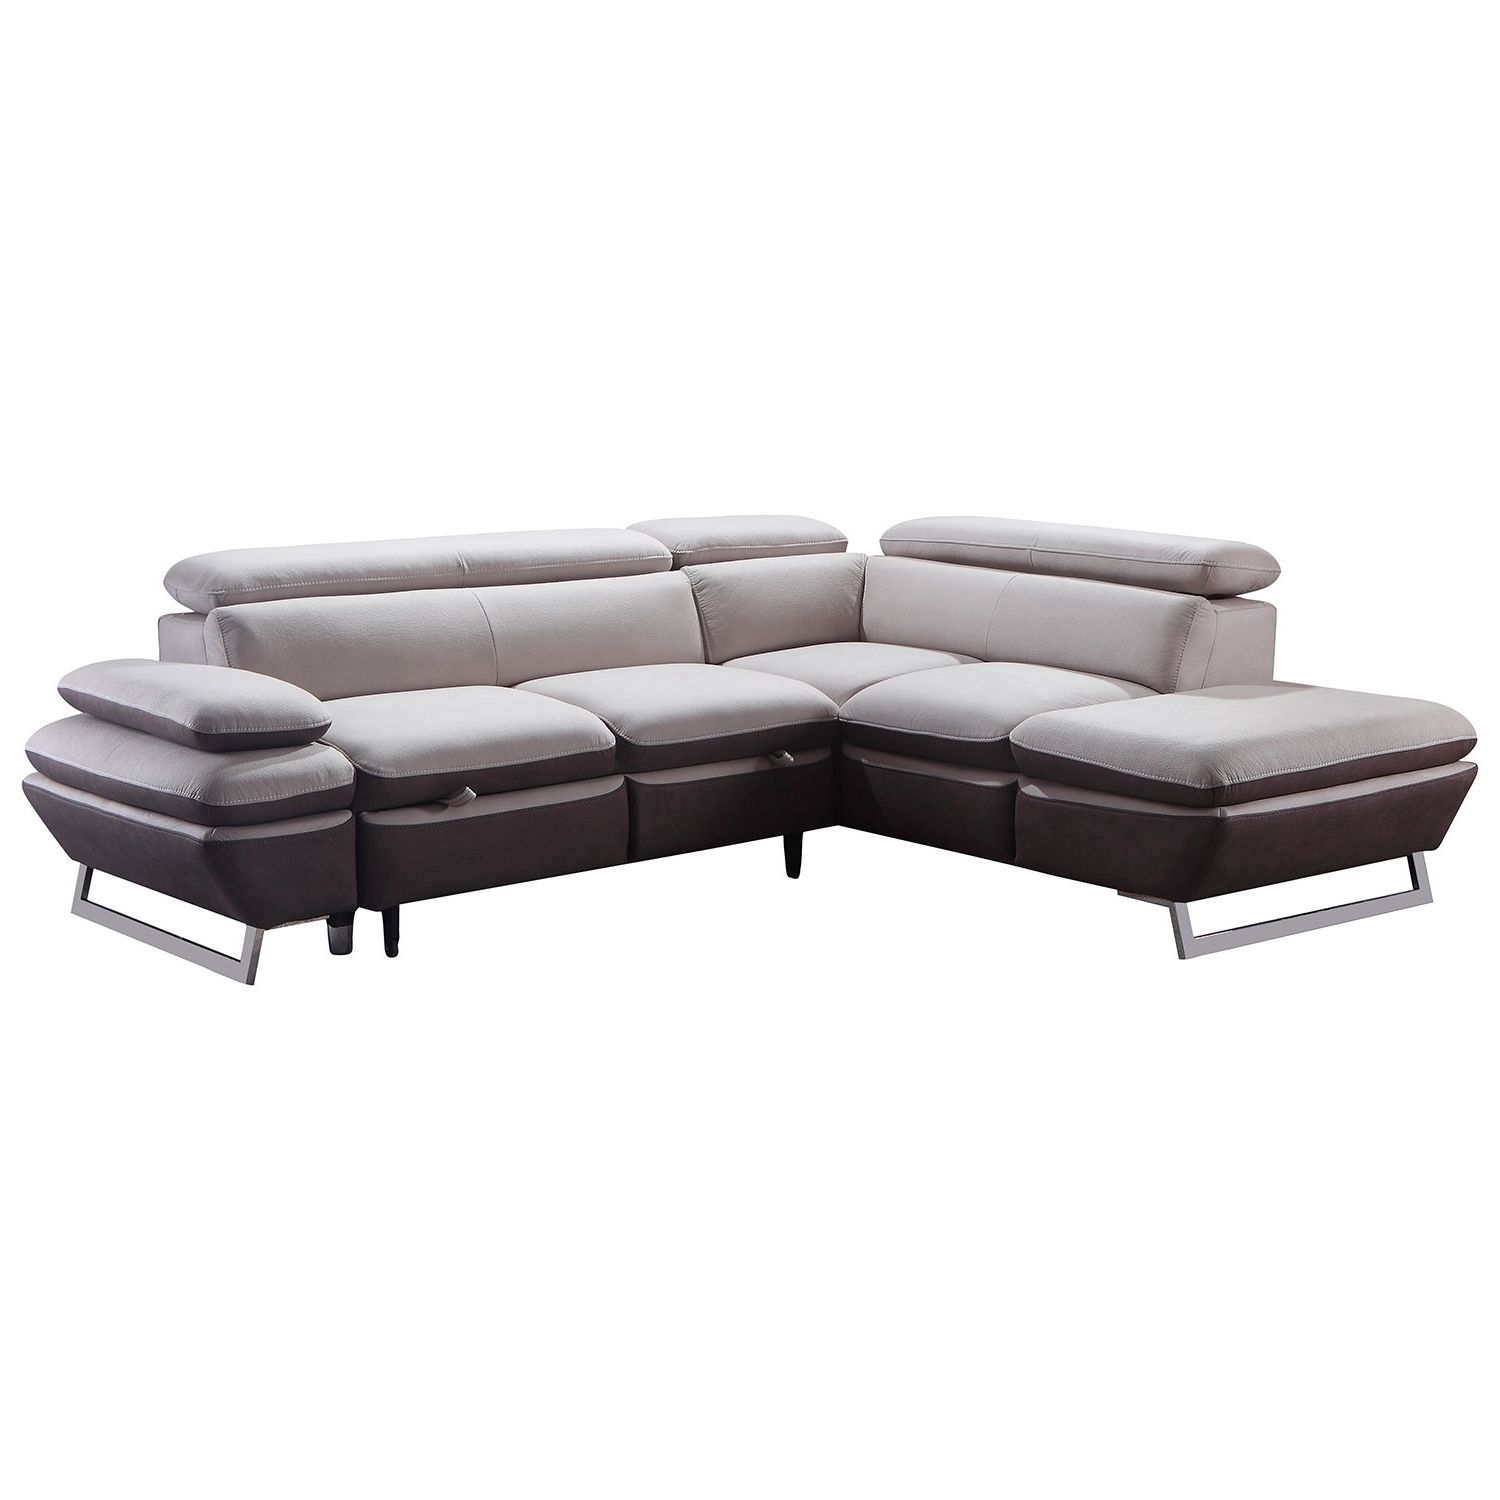 Newfoundland Sectional Sofas For Most Up To Date Nina Contemporary 2 Piece Nappa Sectional Sofa With Right Facing (View 10 of 15)